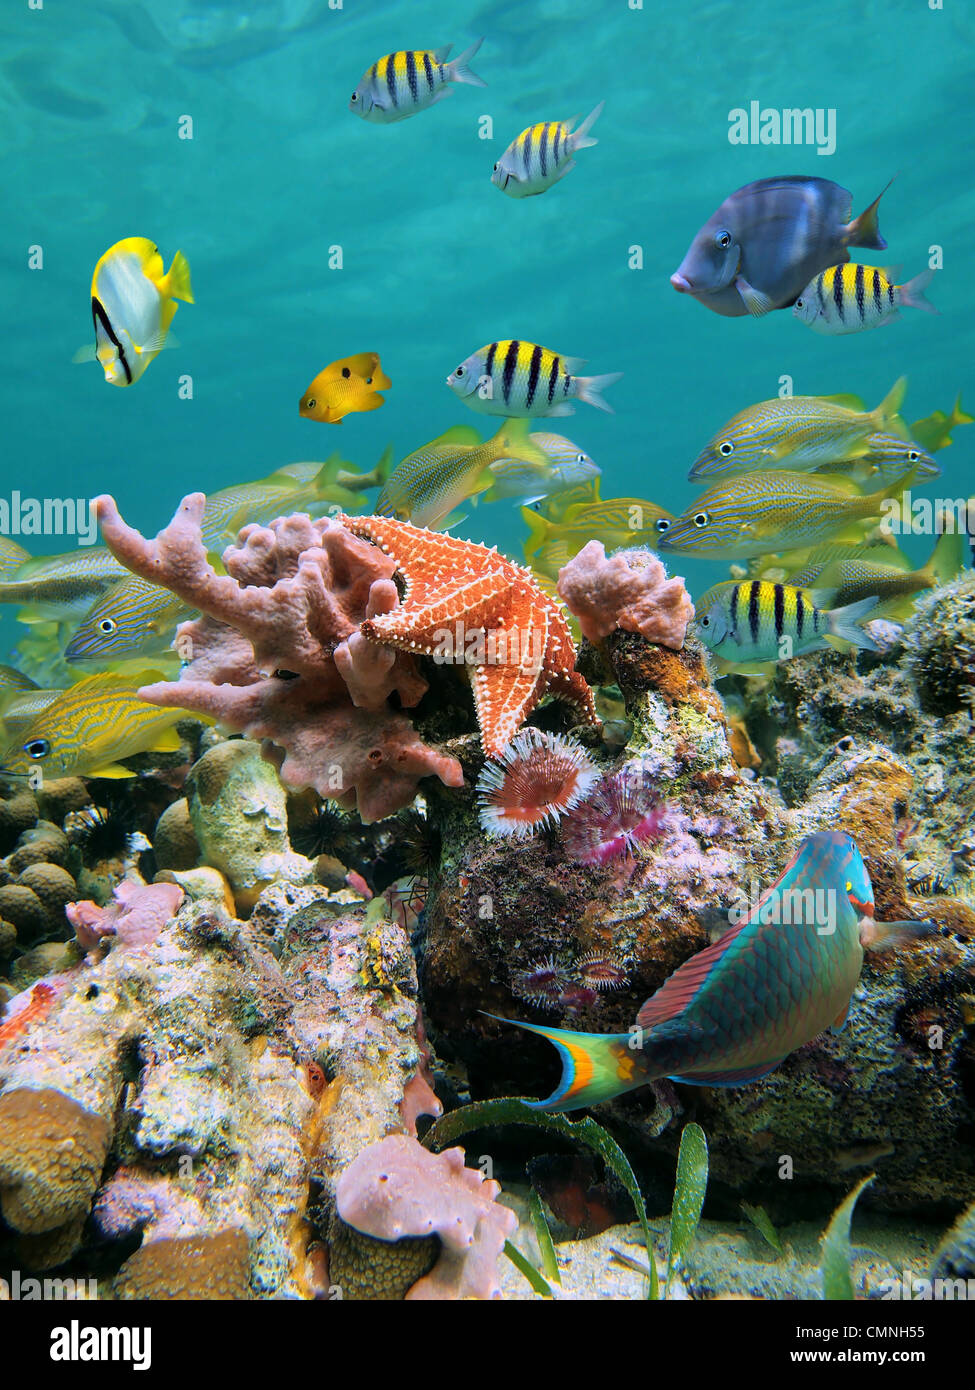 A shoal of colorful tropical fish with a starfish, sponges and marine worms in a coral reef of the Caribbean sea Stock Photo